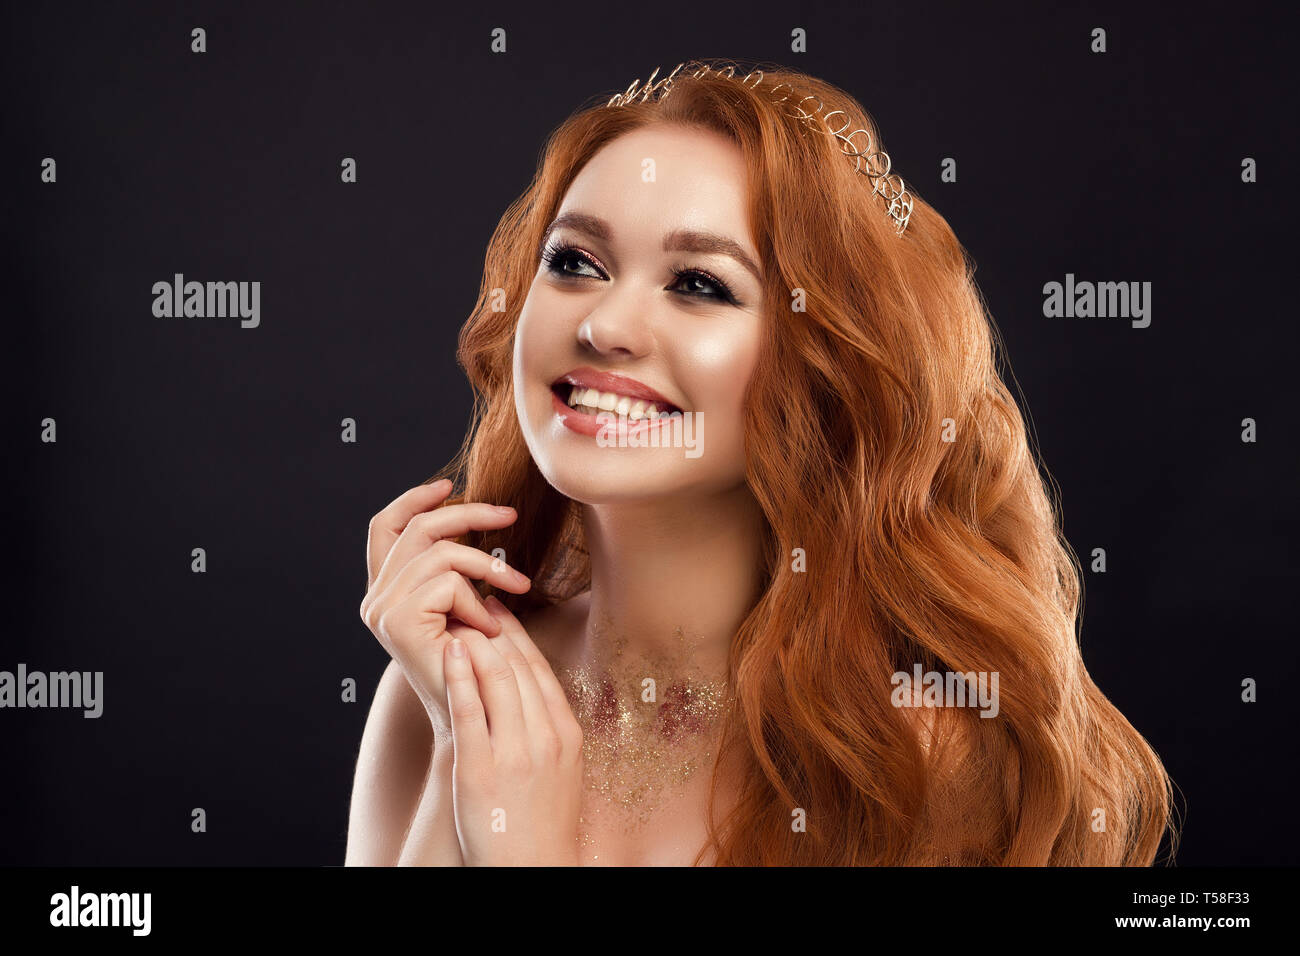 beauty smile portrait red girl Stock Photo